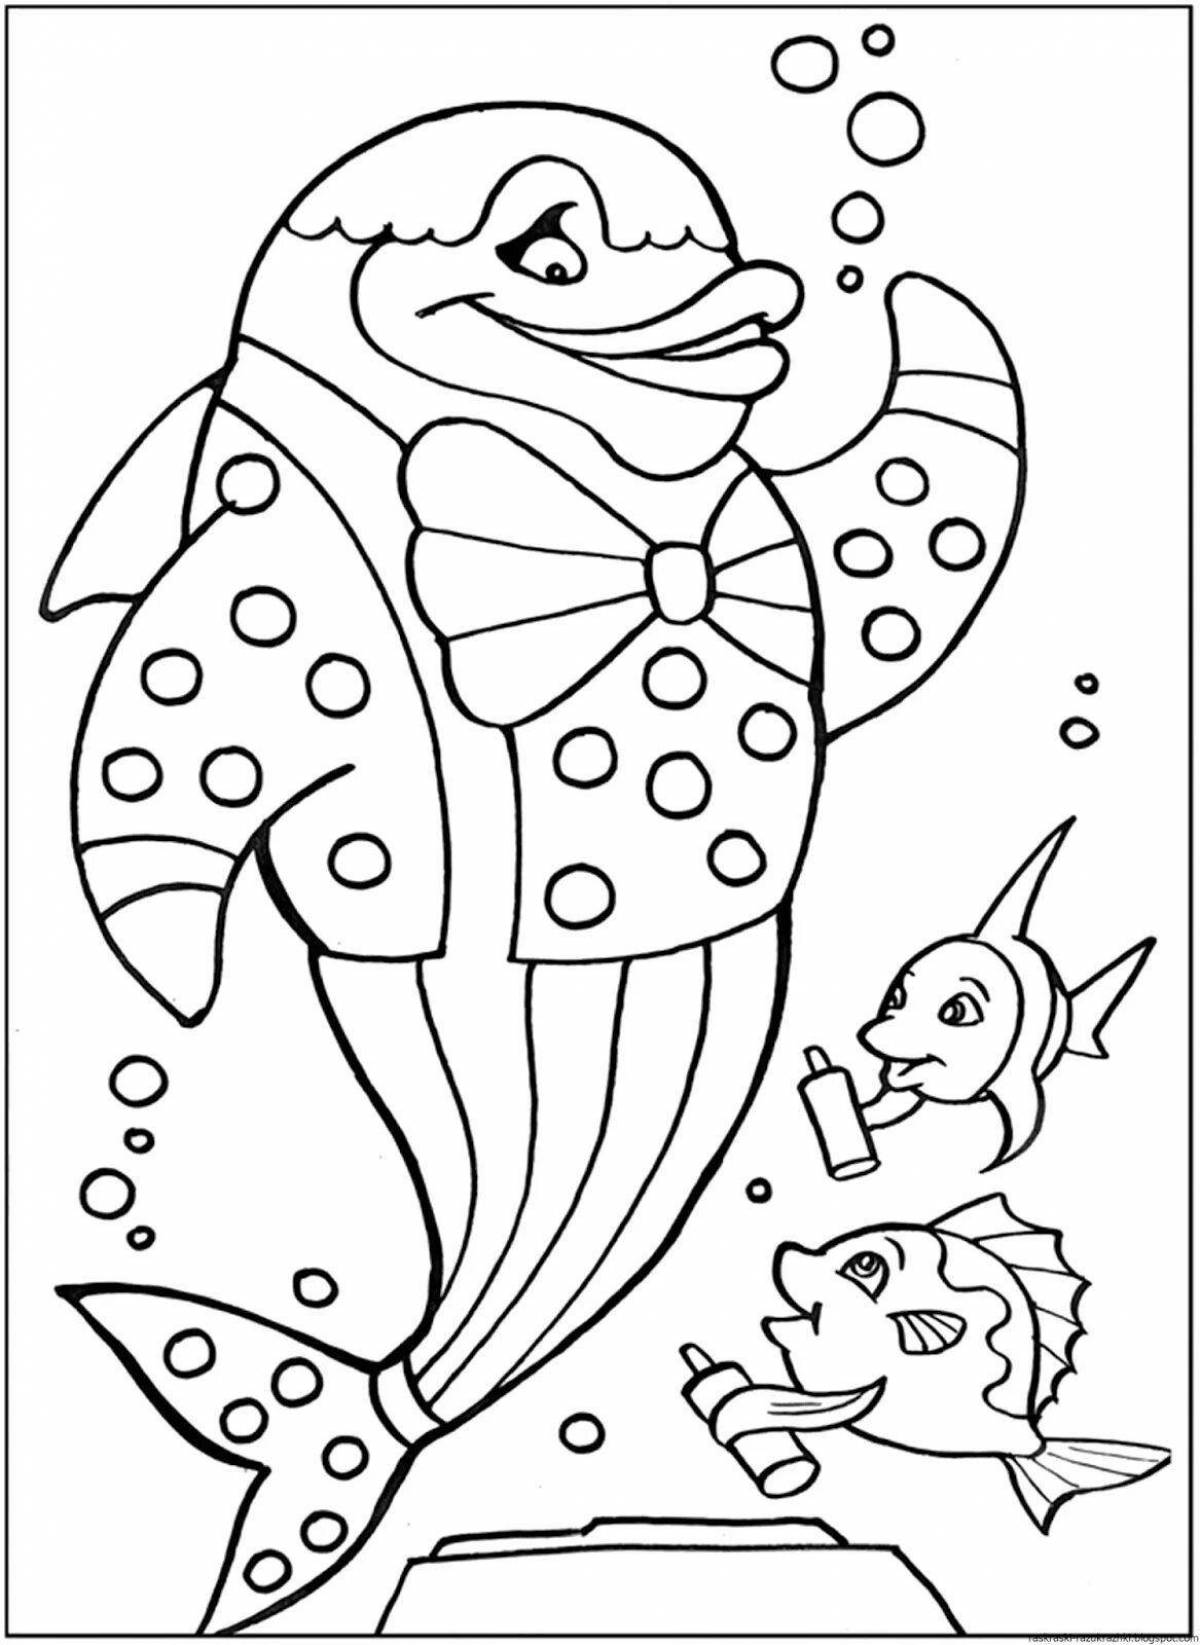 Glorious water baby world coloring page